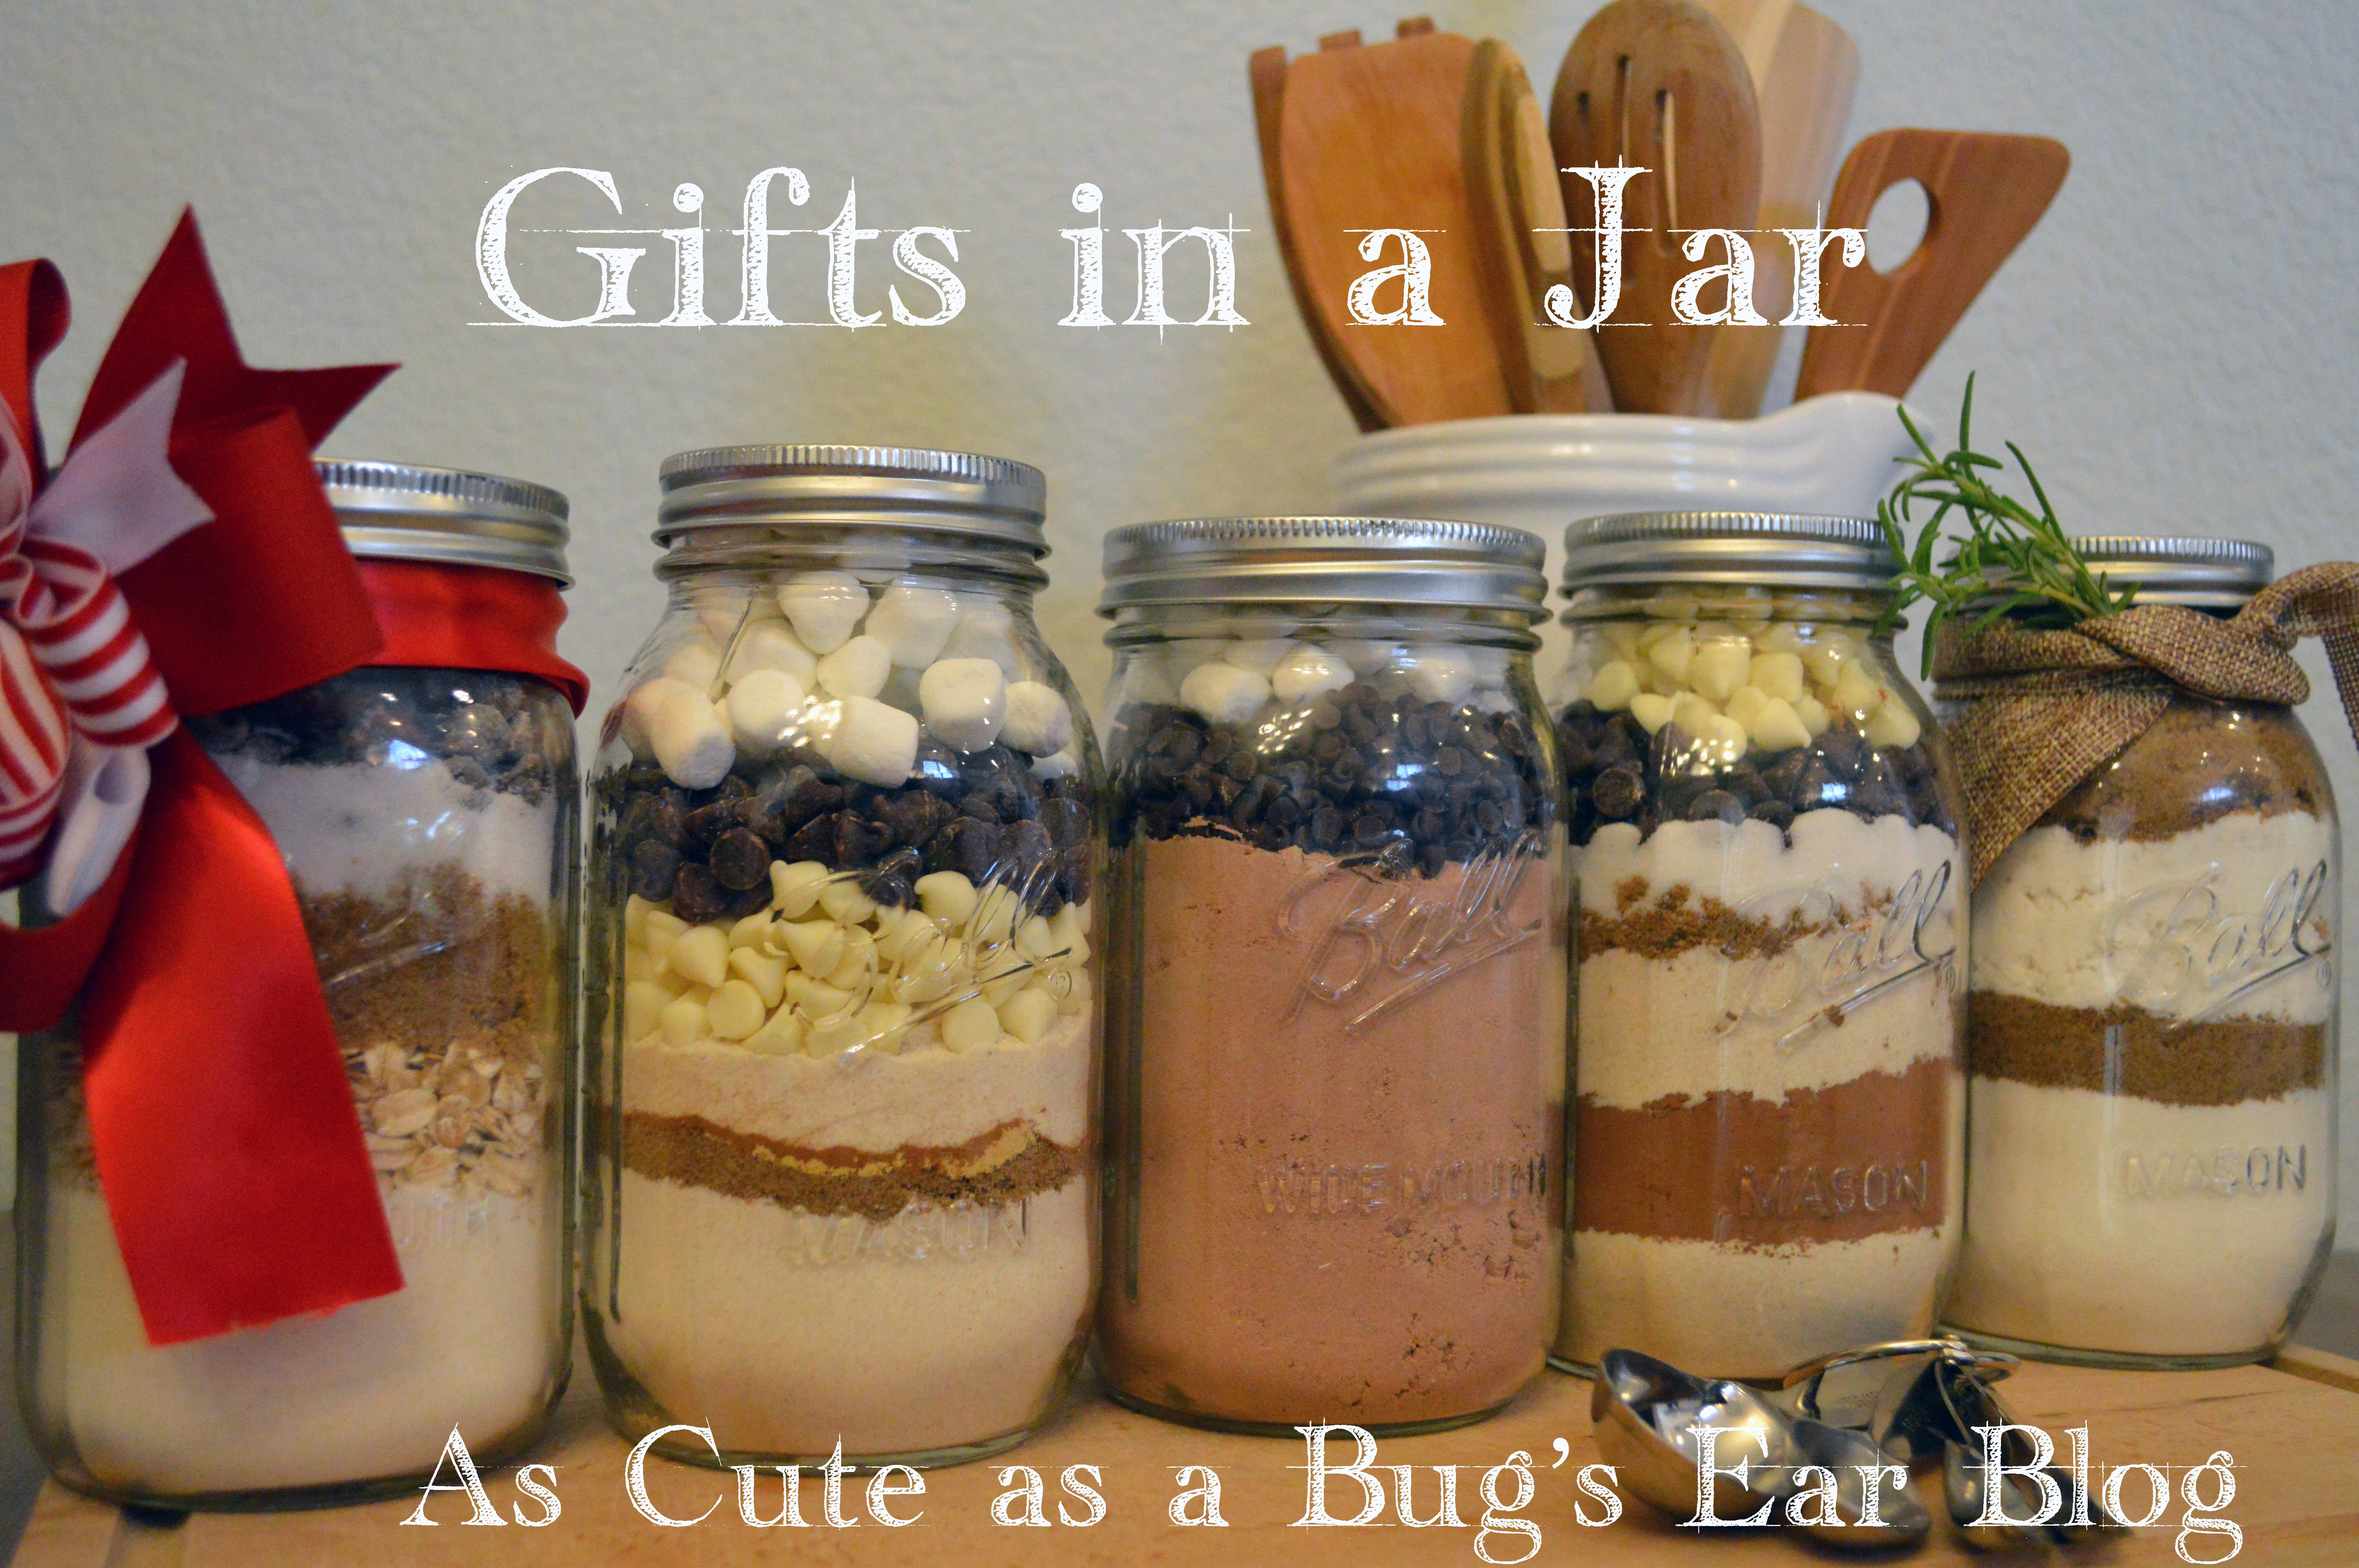 Baking Goods For Christmas Gifts
 5 DIY Holiday Baked Goods in a Jar